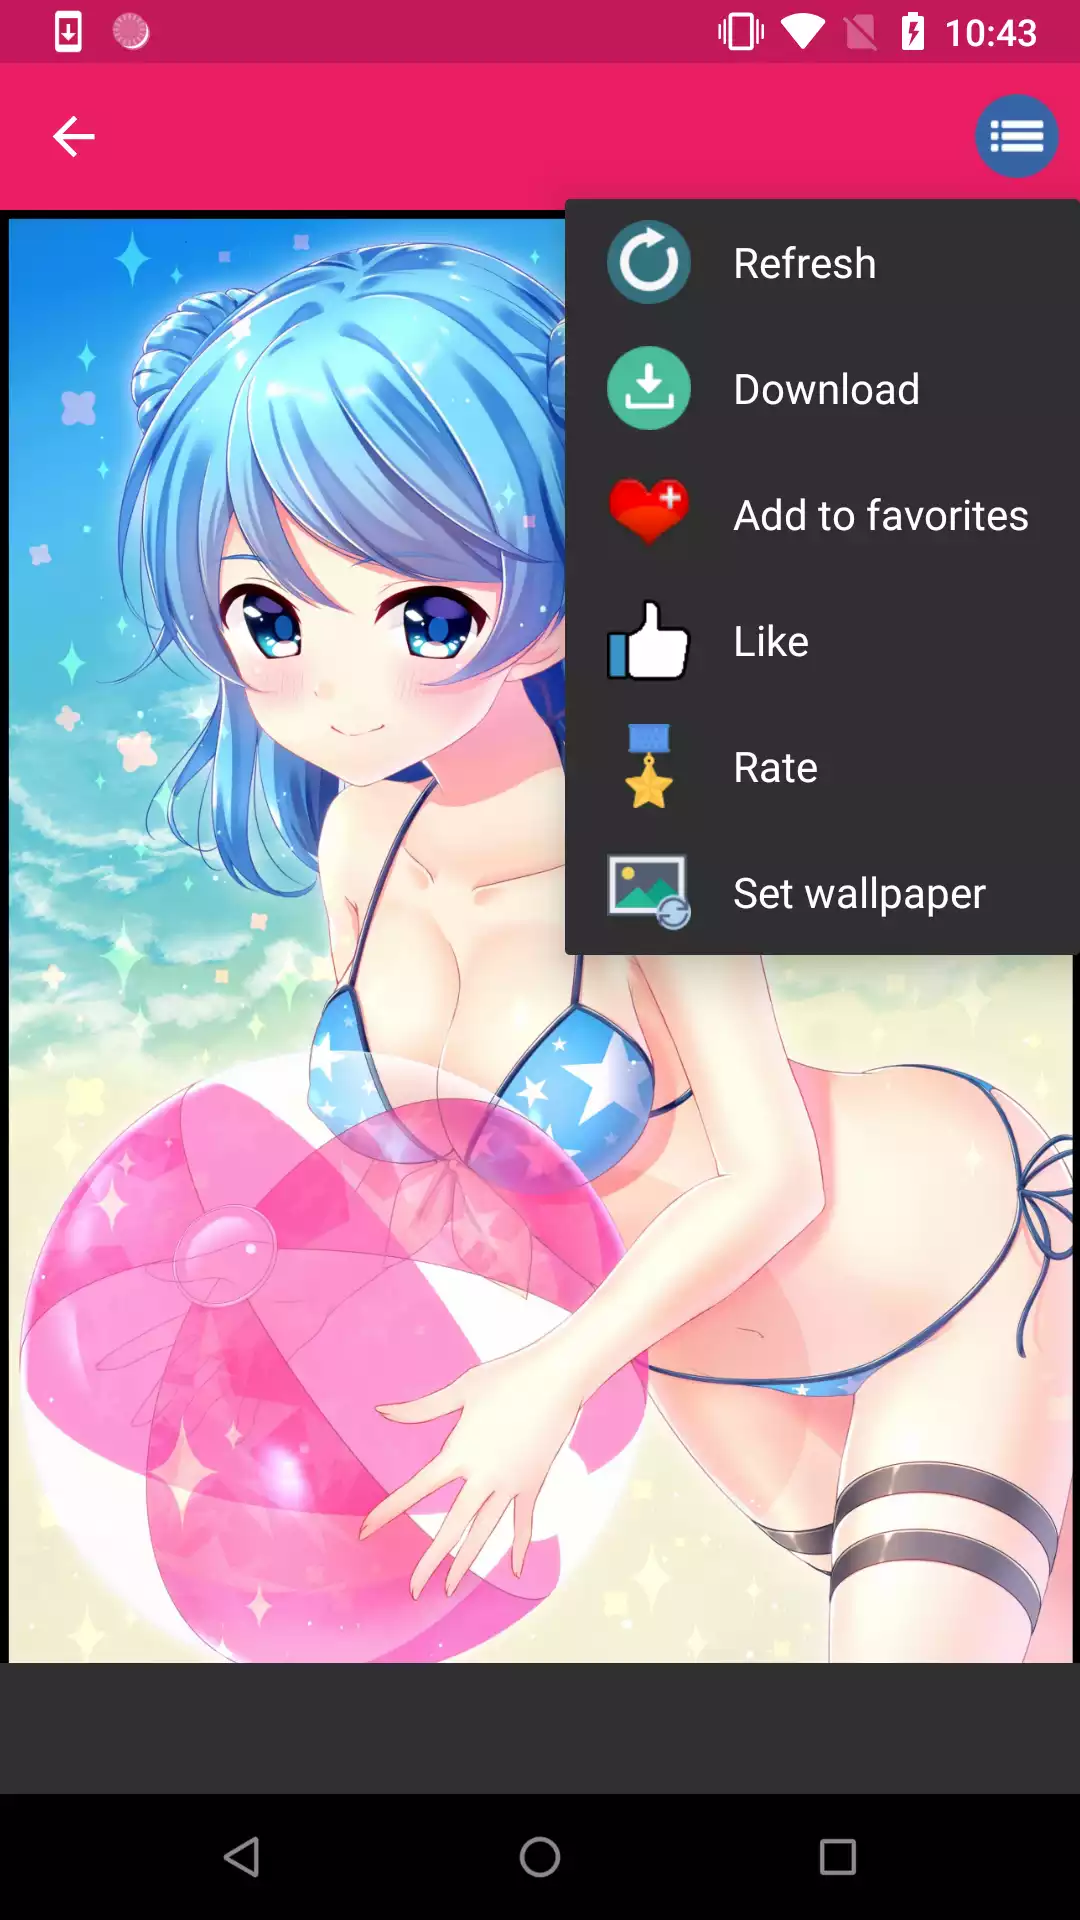 Sexy Anime Girls Wallpapers picture,apps,pics,porn,girls,hentai,sexy,adult,app,henti,download,backgrounds,photo,offline,wallpapers,apk,free,pic,anime,comics